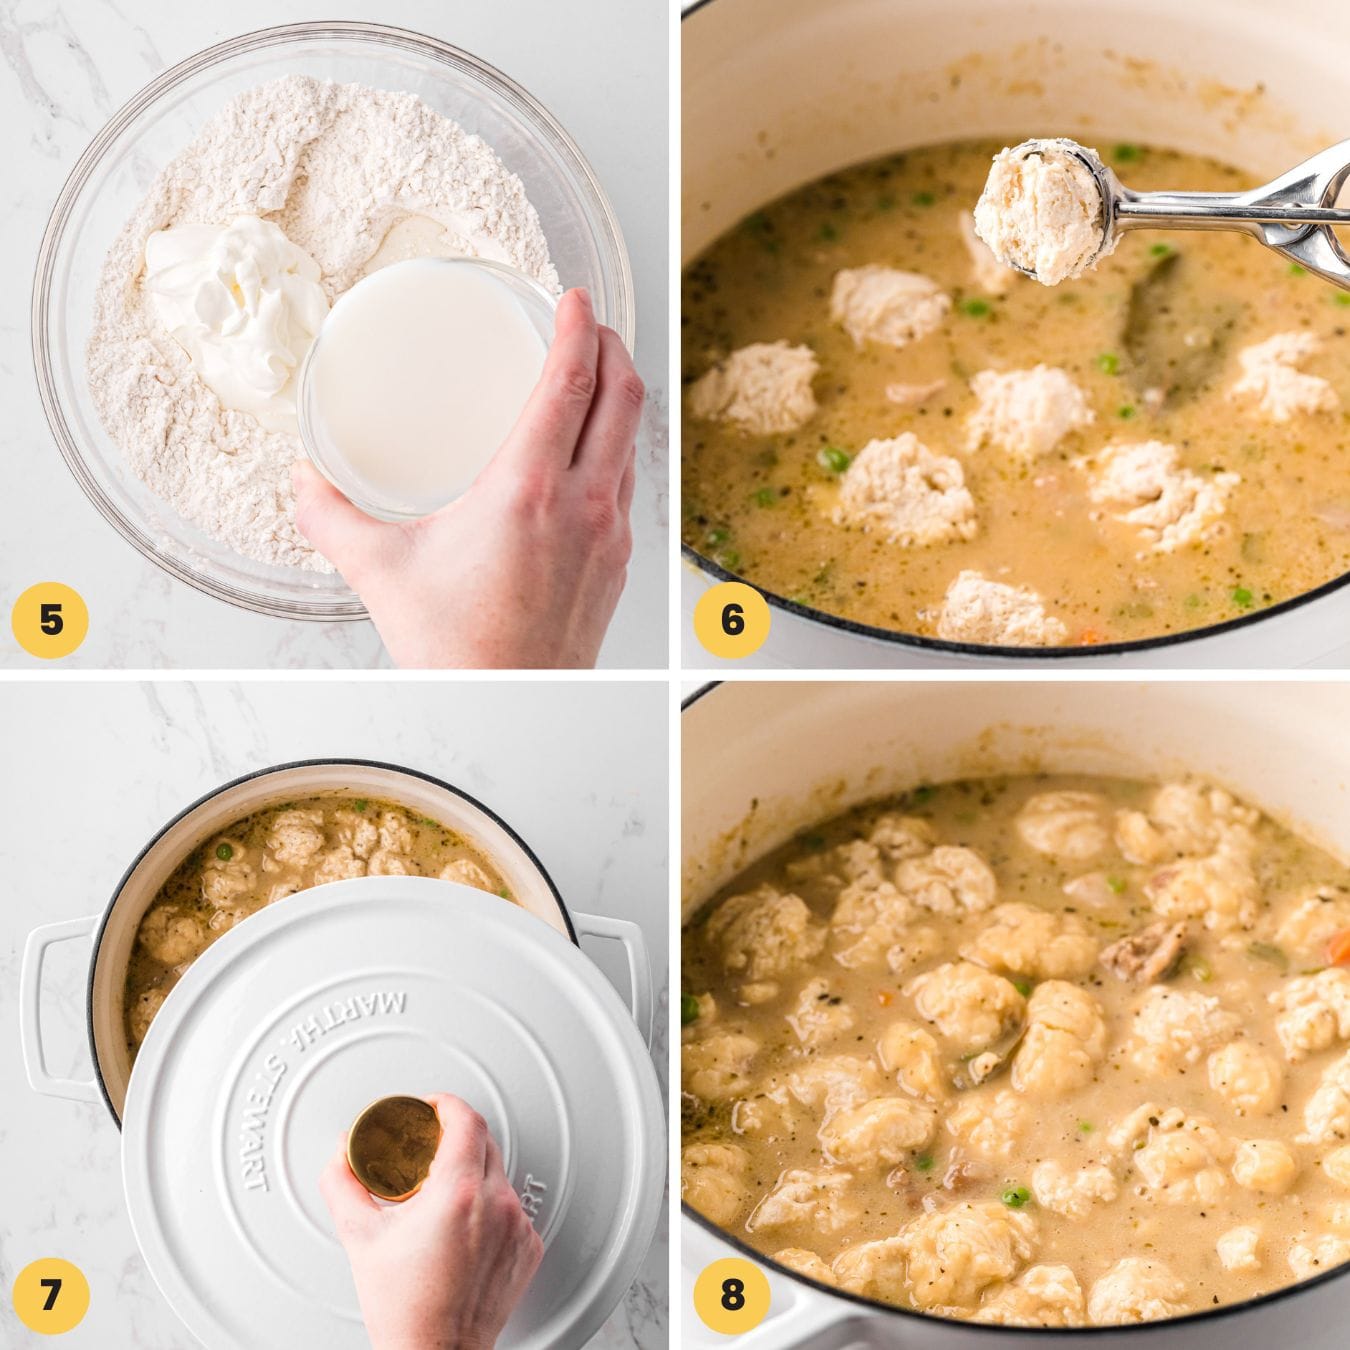 a collage of four images showing how to make homemade dumplings and cook them in creamy chicken soup